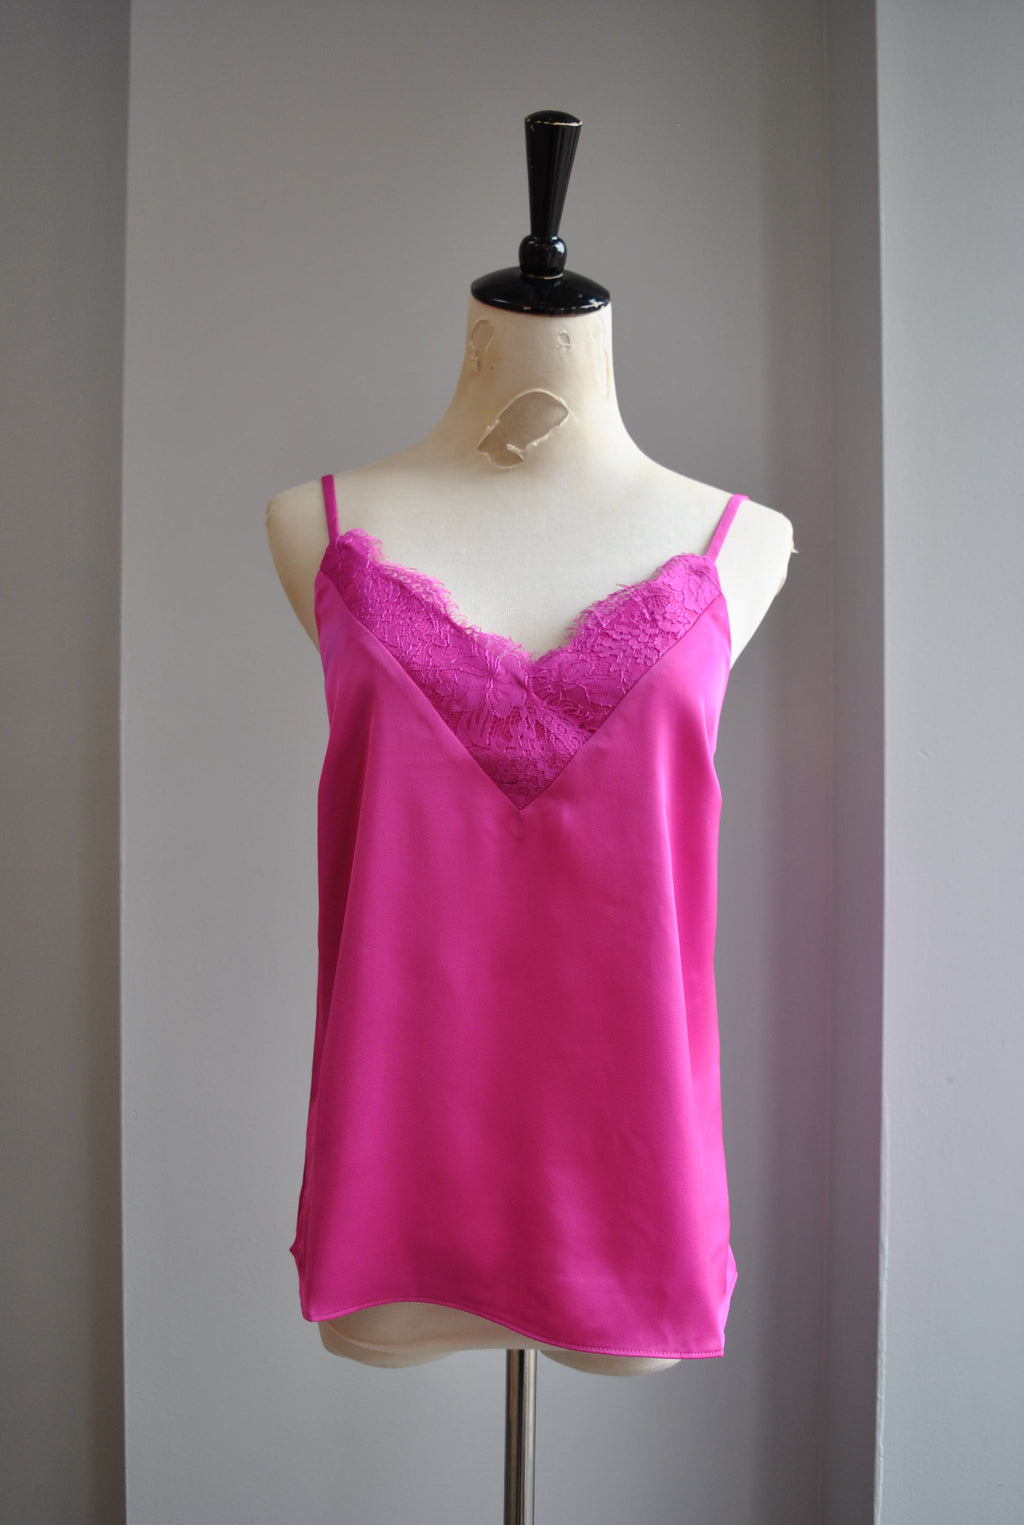 HOT PINK SIMPLE CAMI WITH LACE